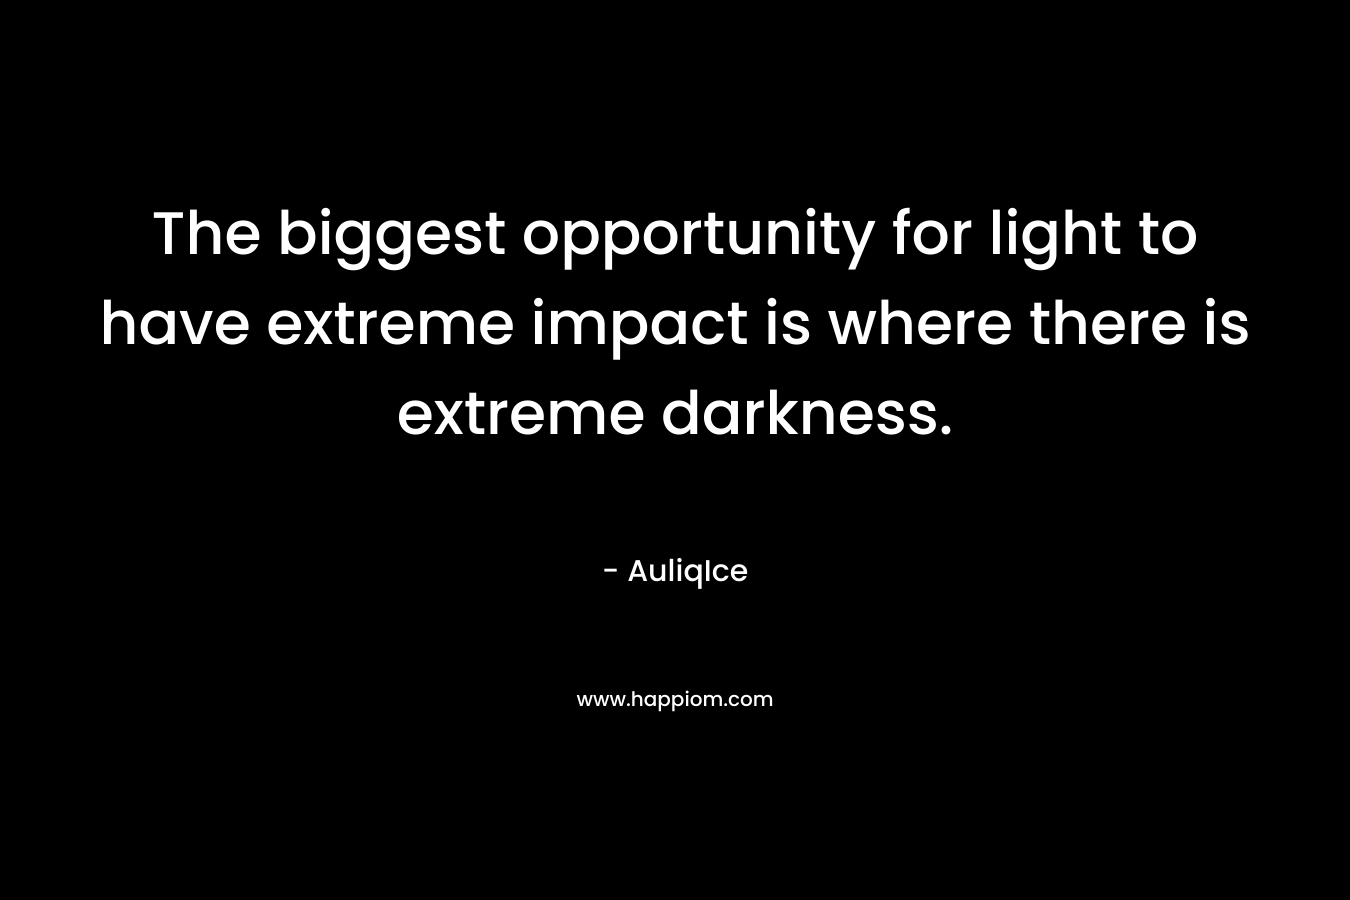 The biggest opportunity for light to have extreme impact is where there is extreme darkness.